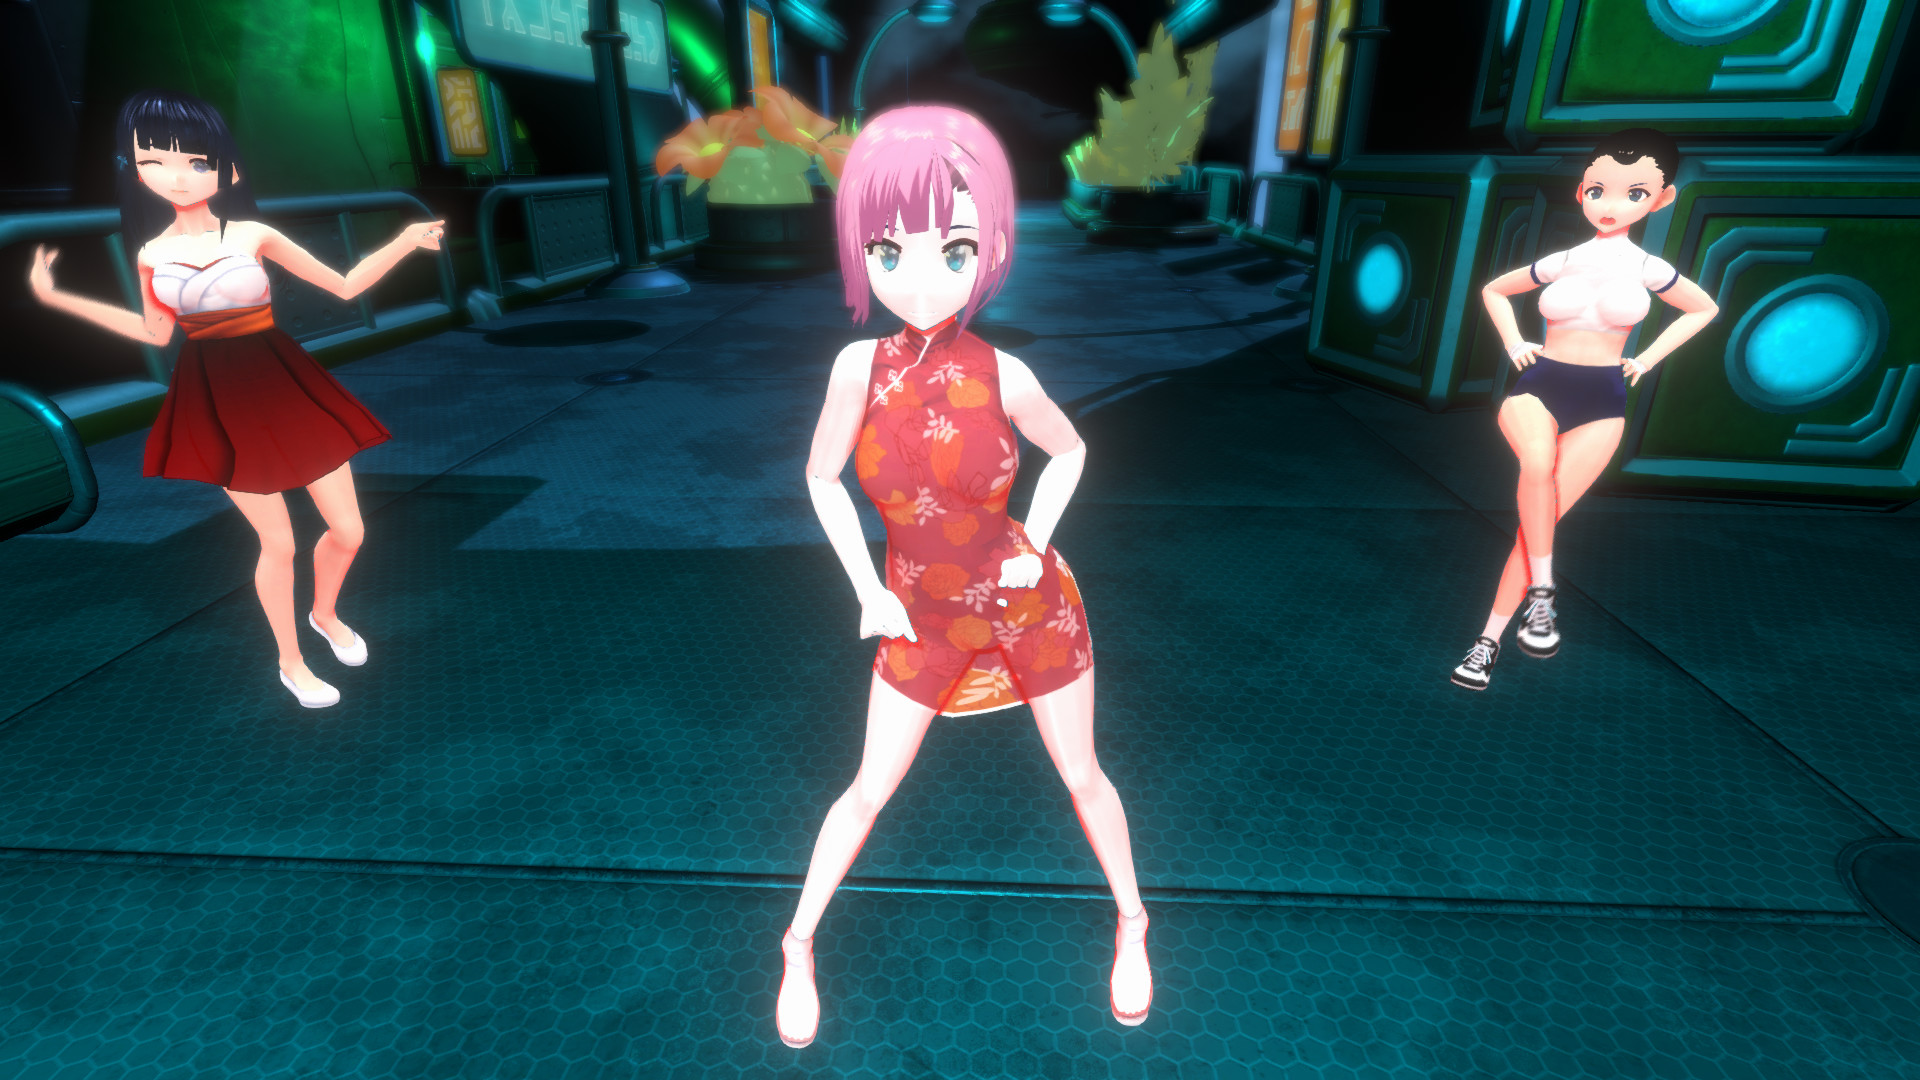 Dancing with Anime Girls VR Free Download